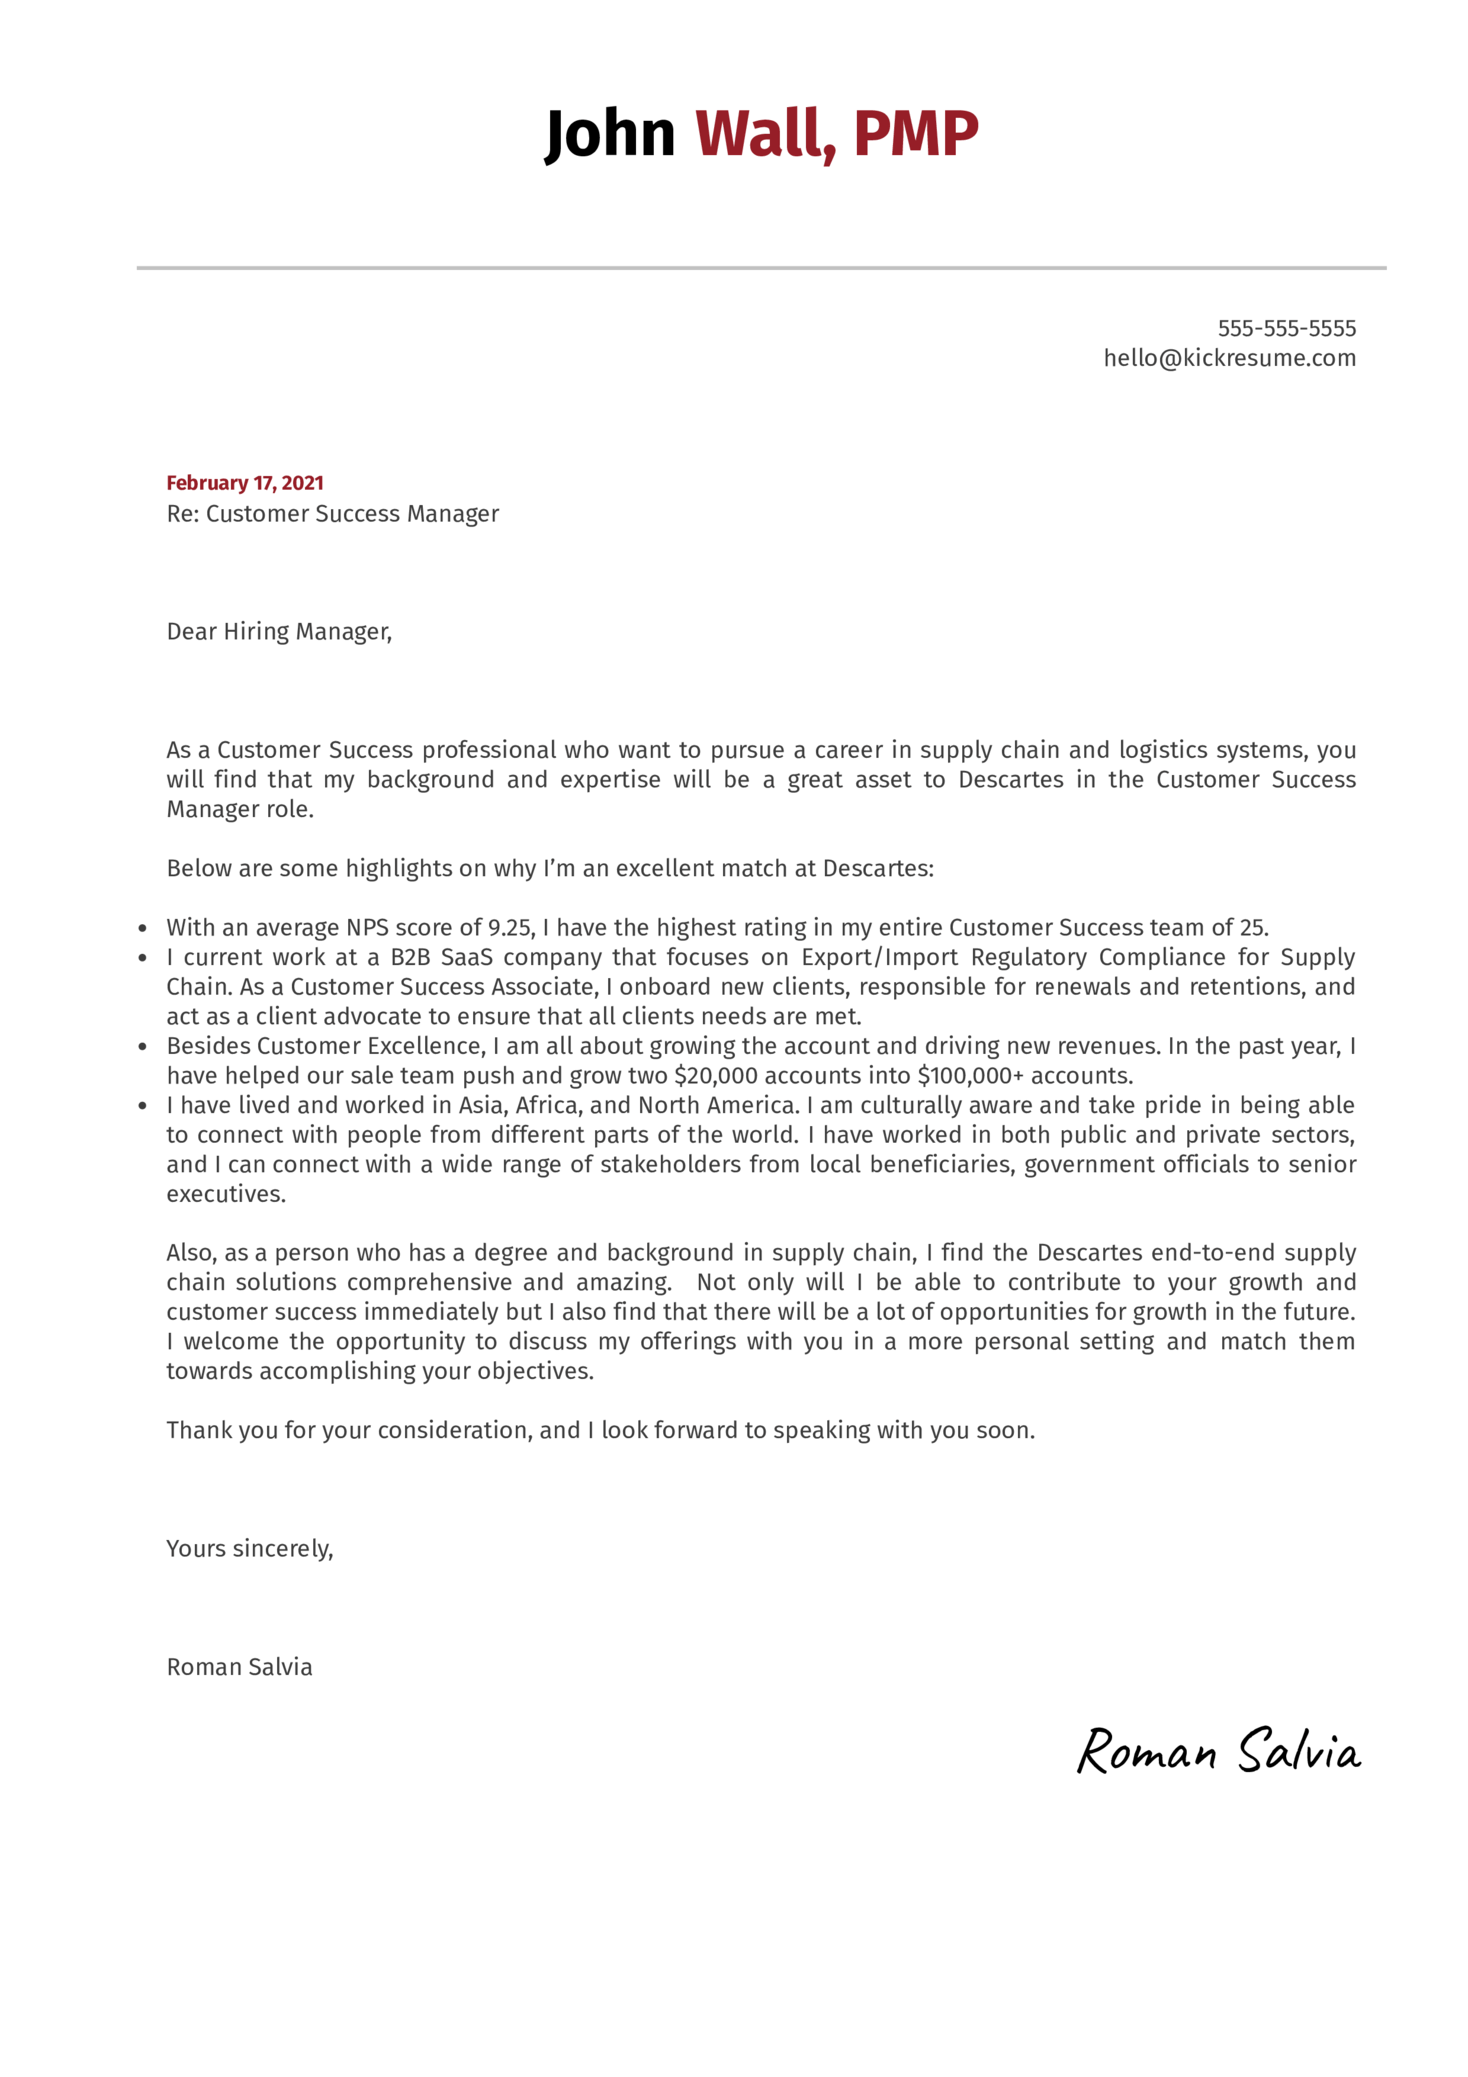 Cover Letter Example medium by Kickresume